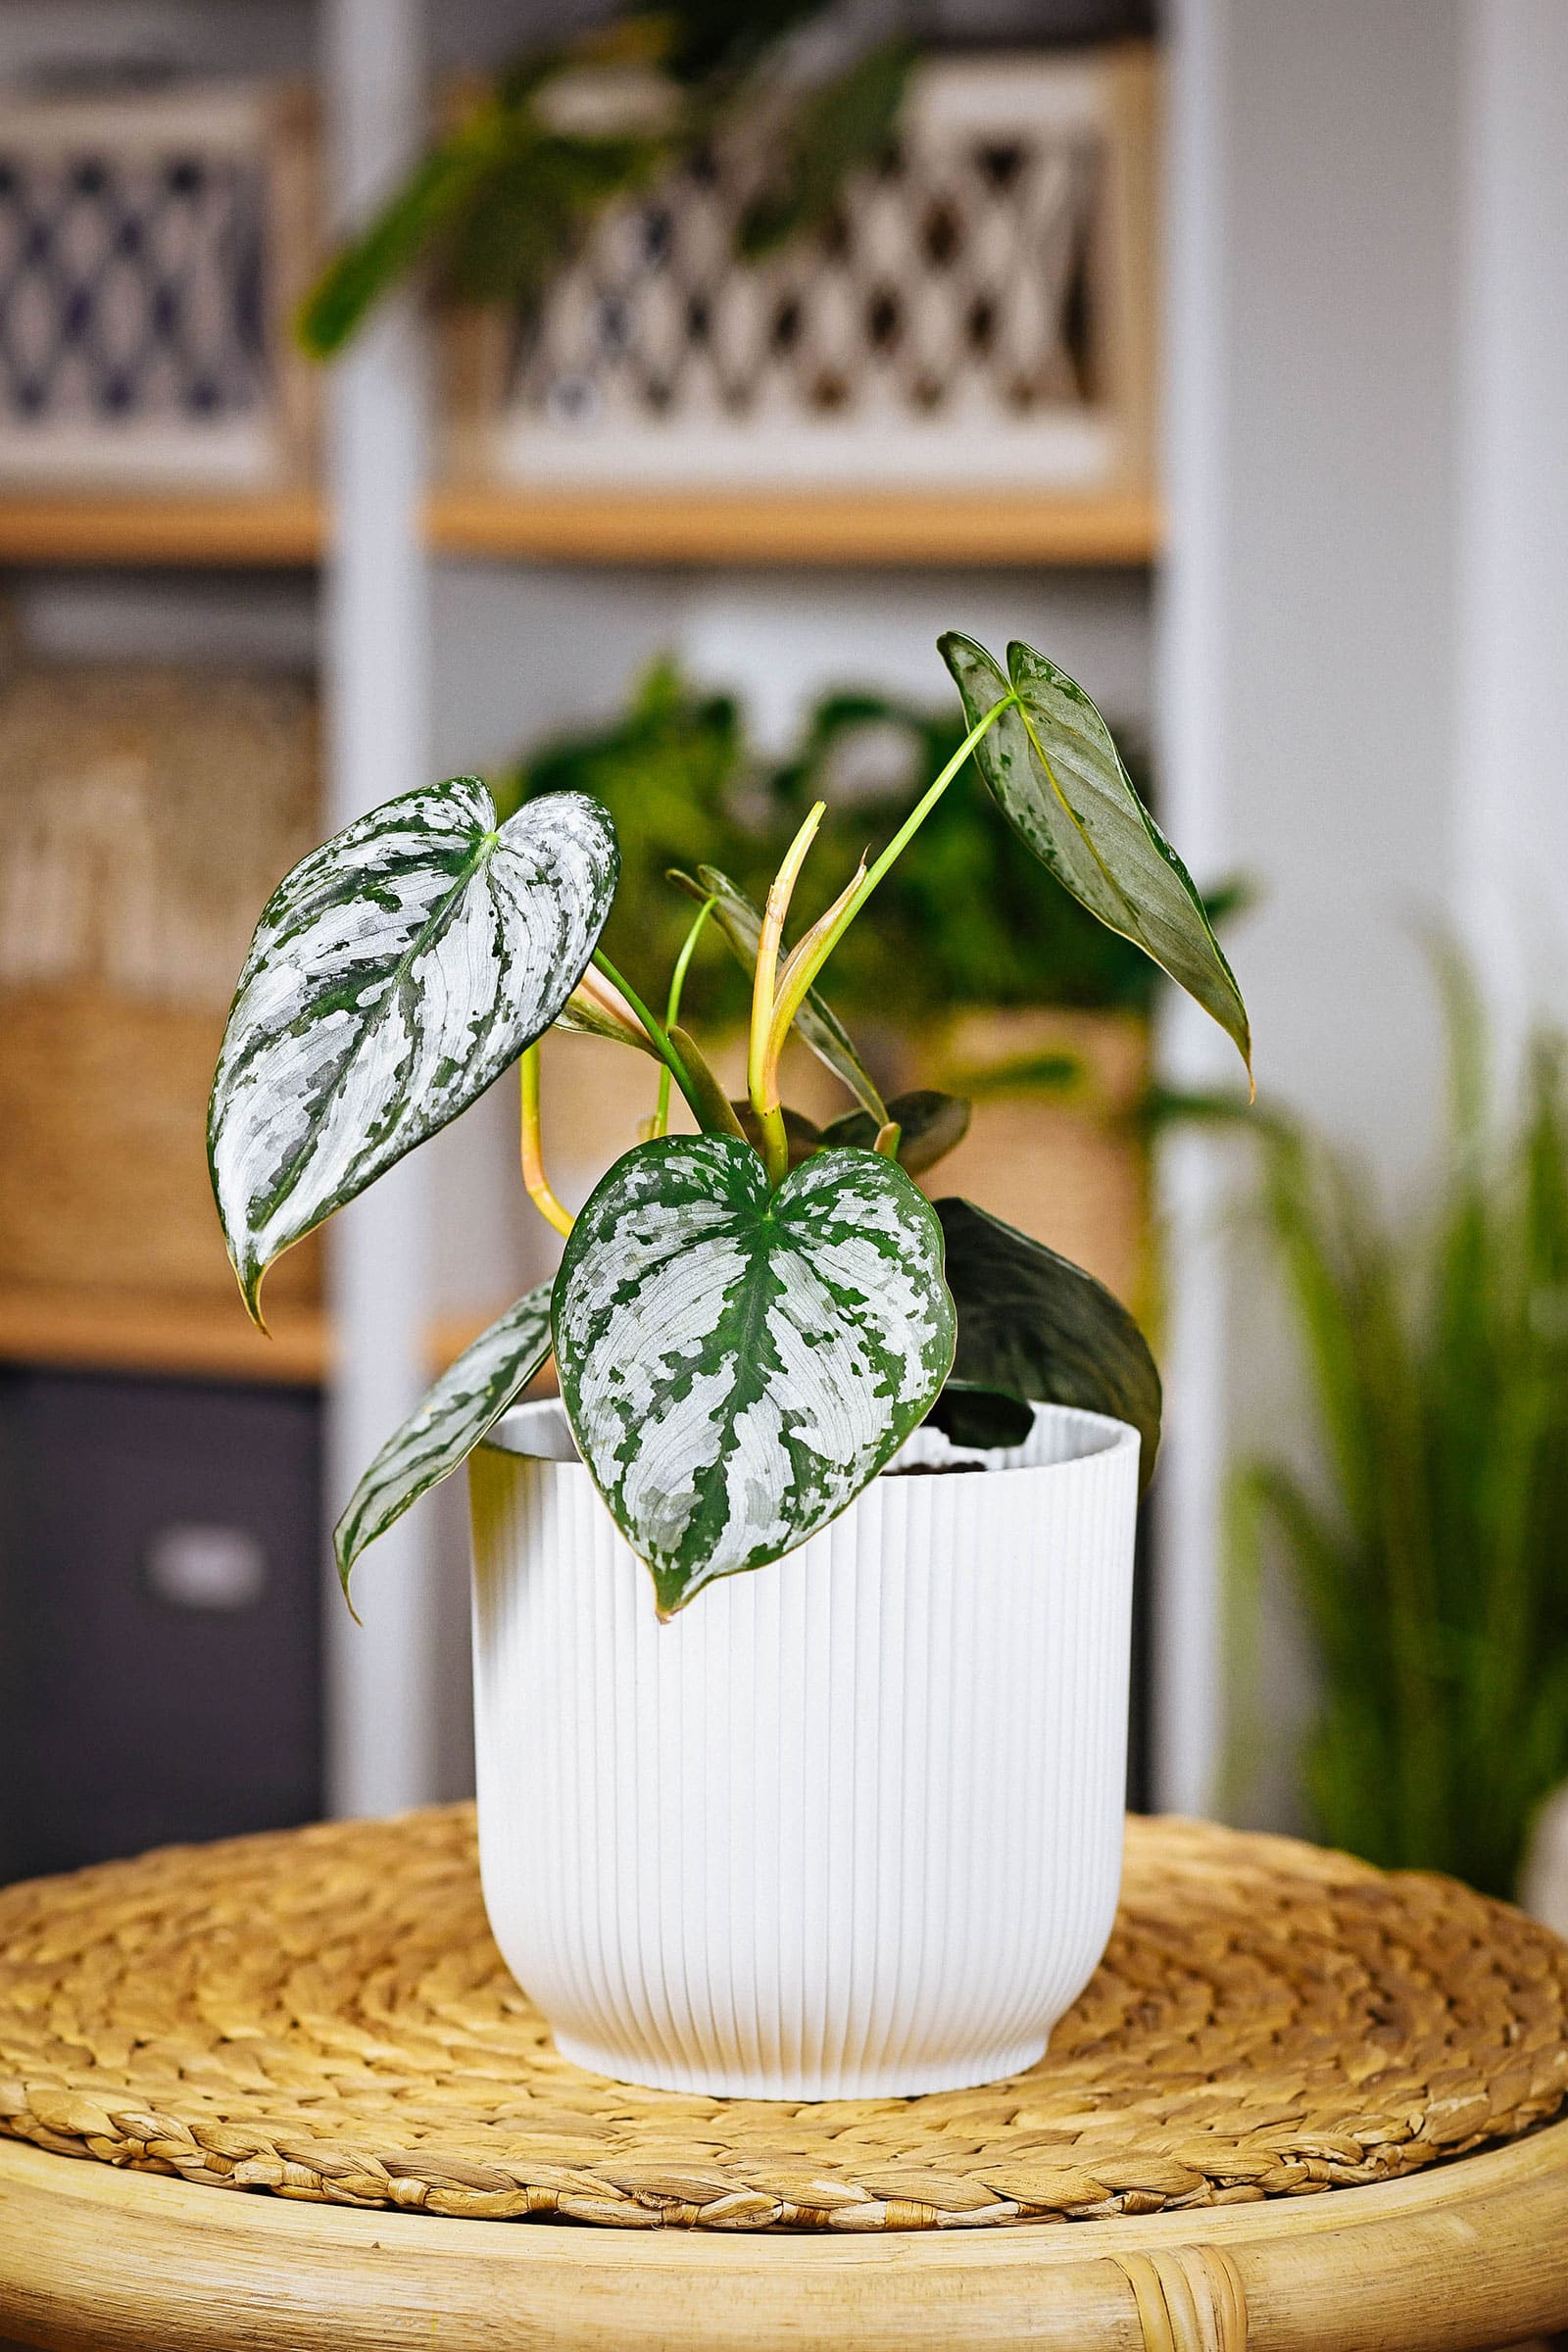 Philodendron brandtianum (Philodendron Brandi) houseplant displayed in a white ceramic pot in a cozy home